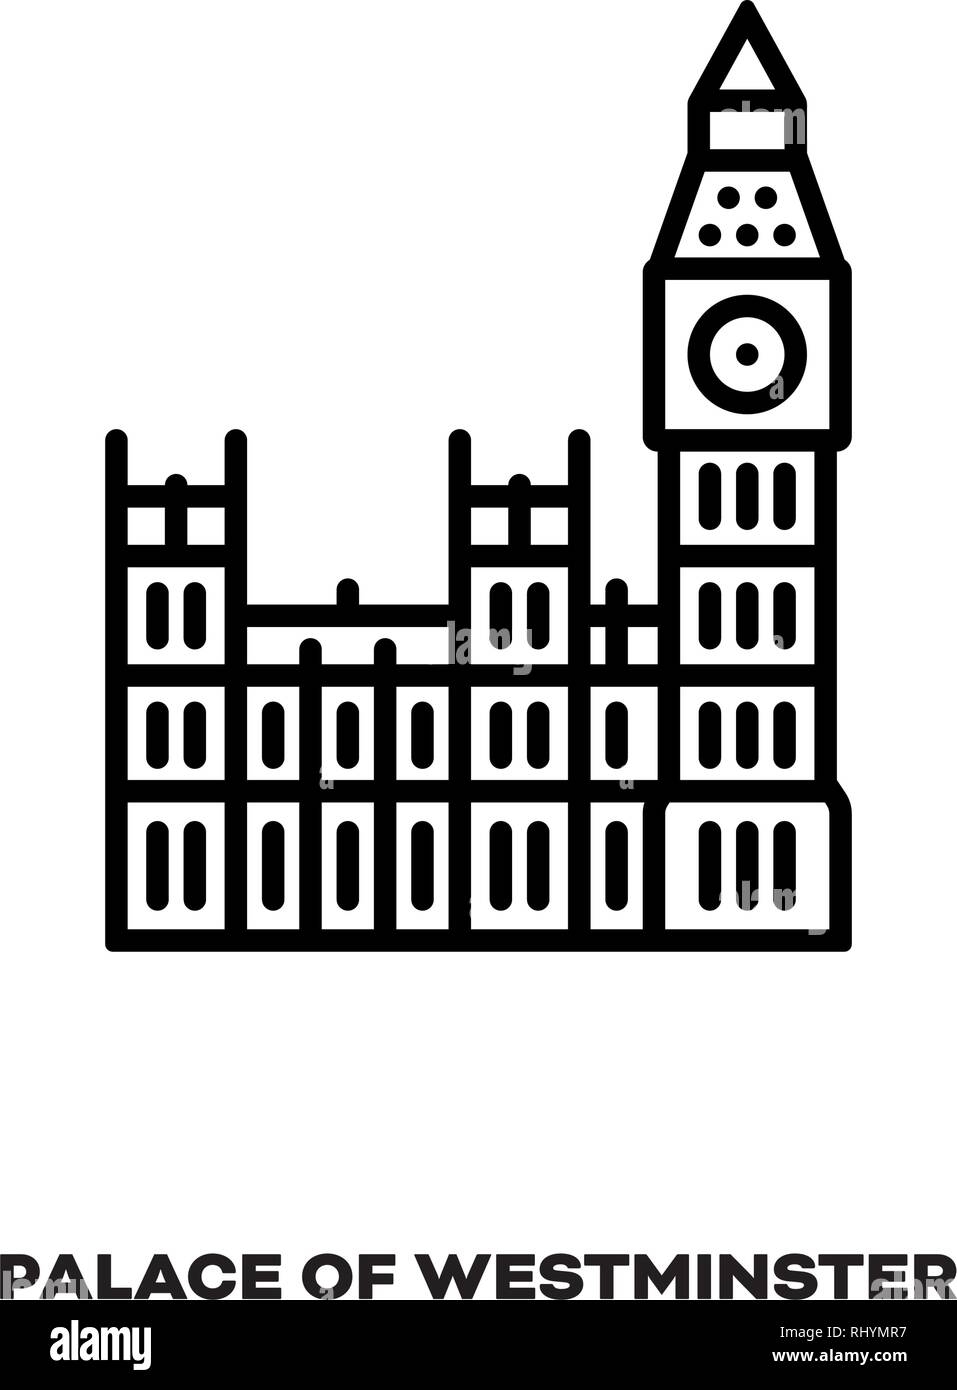 Palace of Westminster and Big Ben bell tower at London, England, United Kingdom, vector line icon. International landmark and tourism symbol. Stock Vector